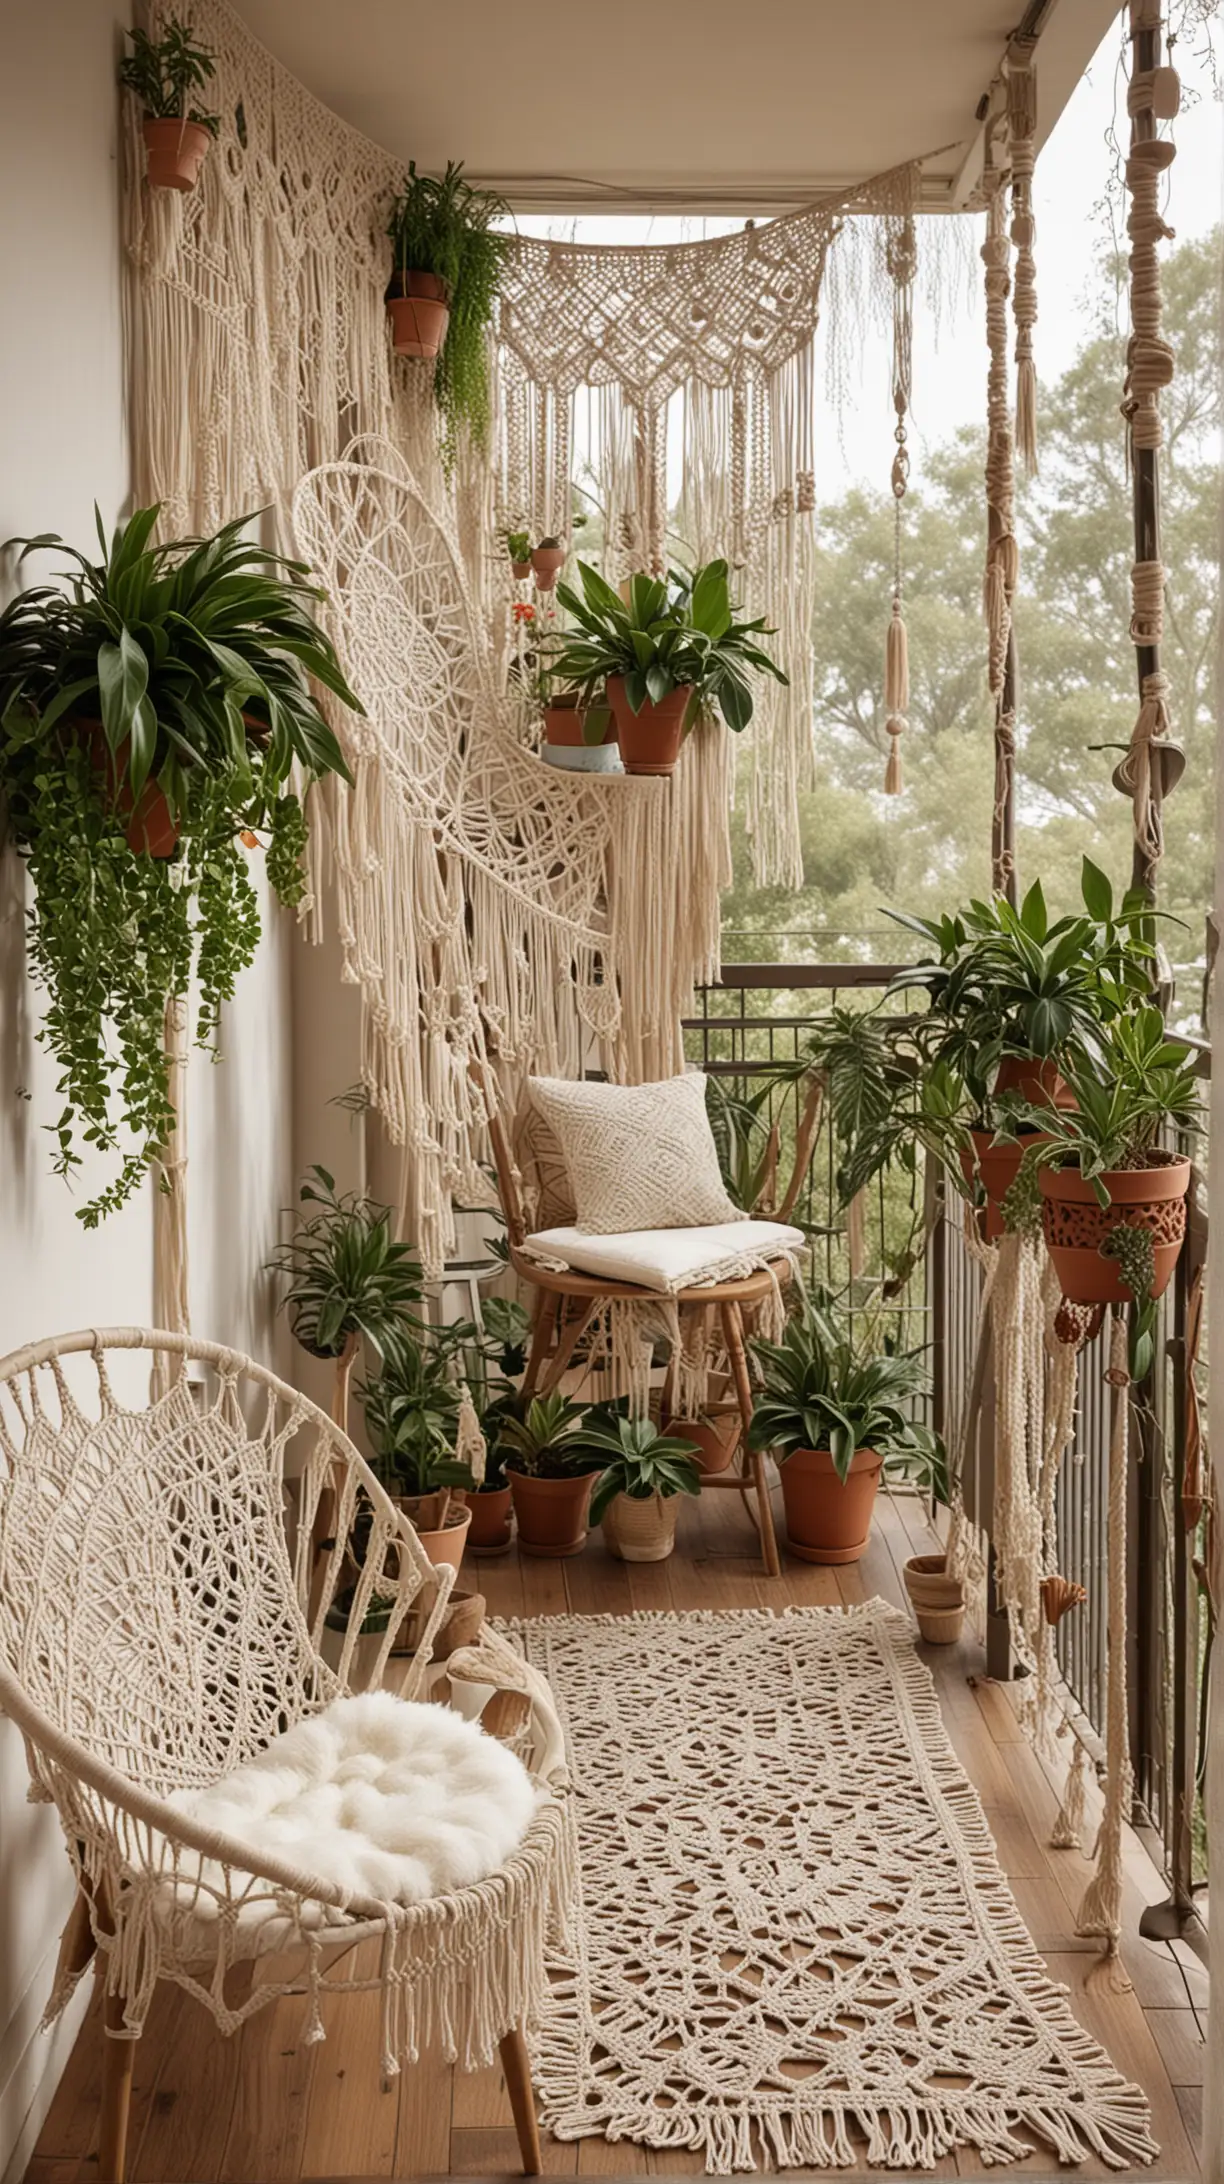 Bohemian balcony with intricate macramé wall hangings and plant hangers, natural light, cozy ambiance.